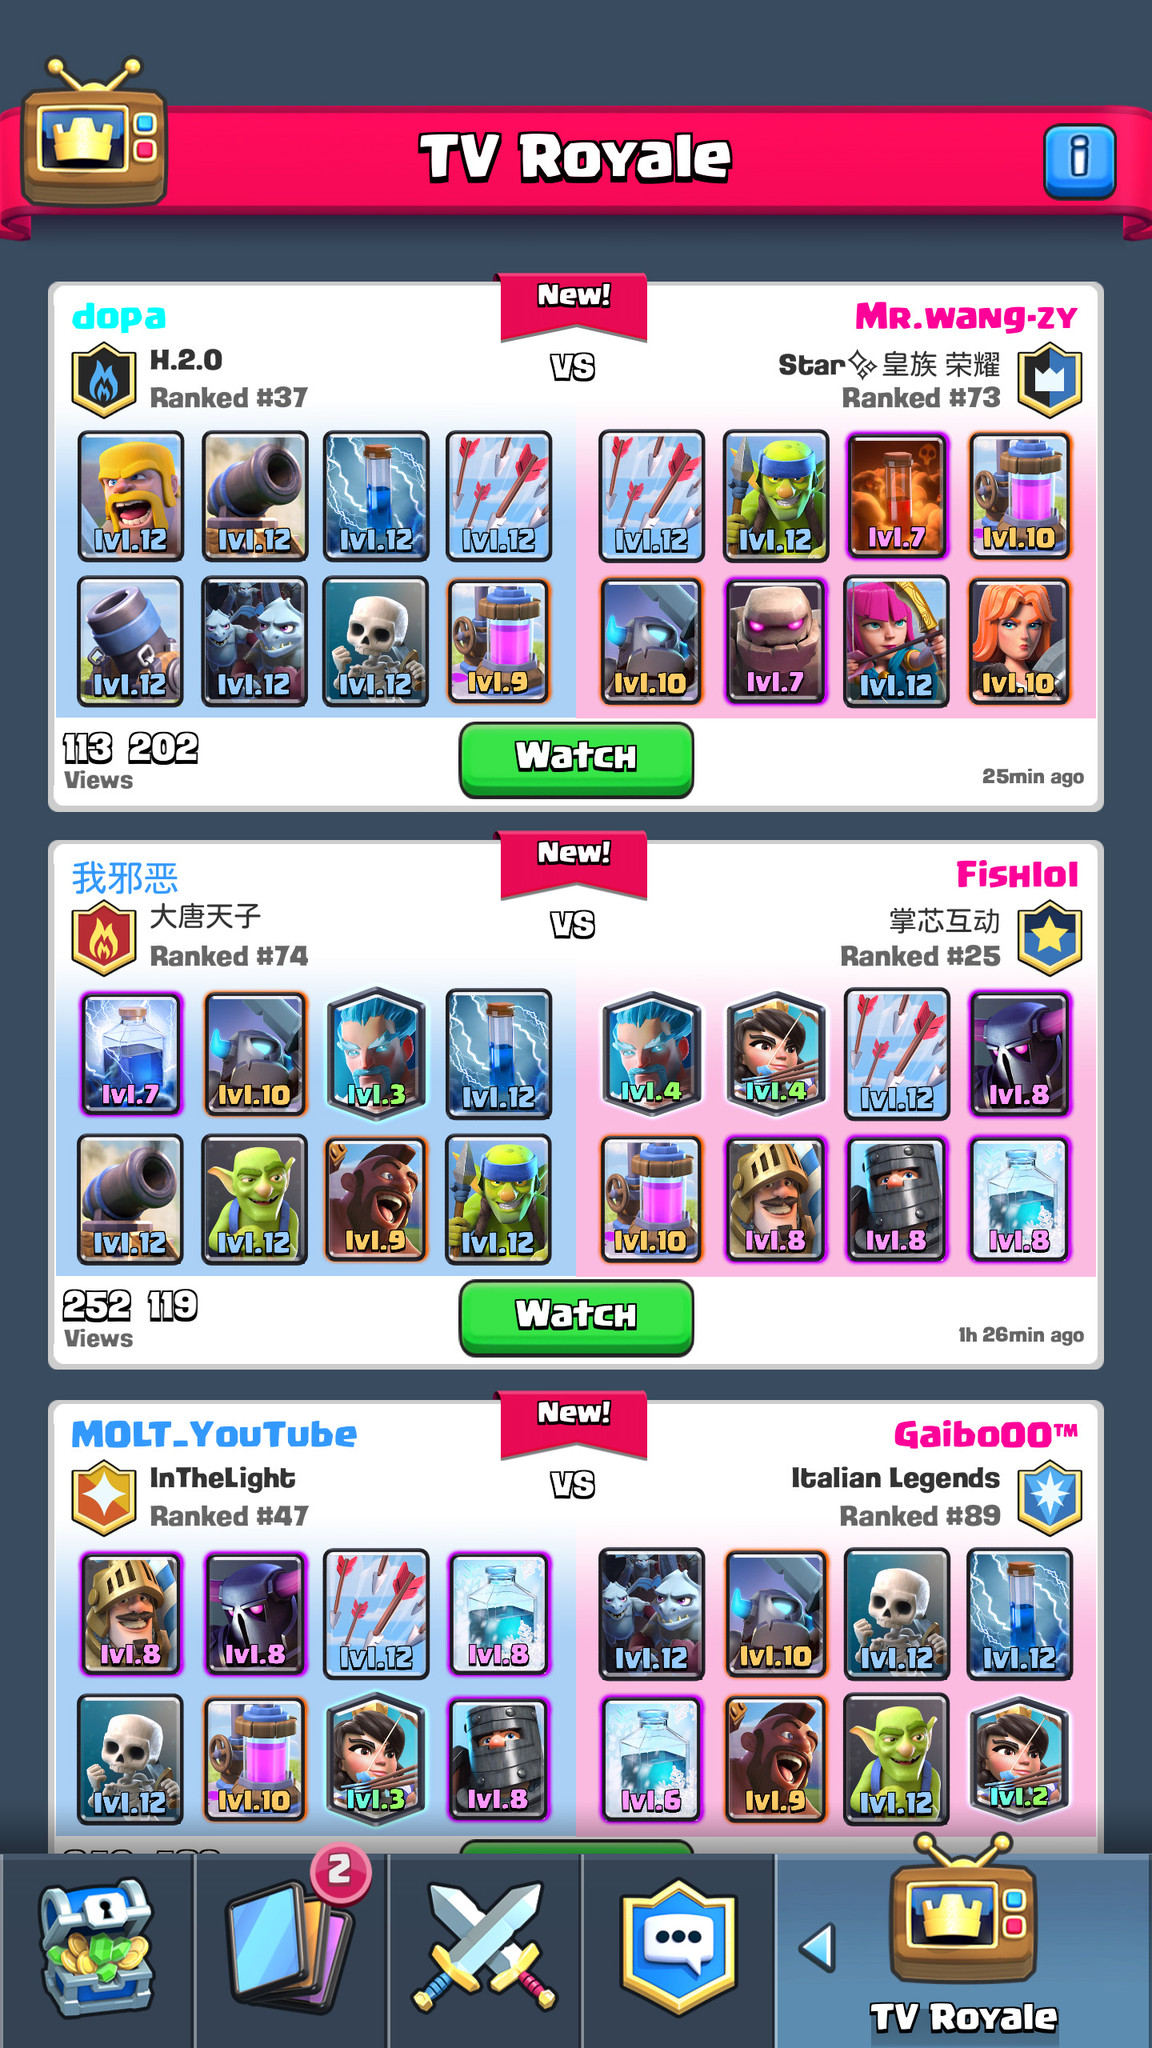 From TV Royale you can watch battles between top-ranked players...